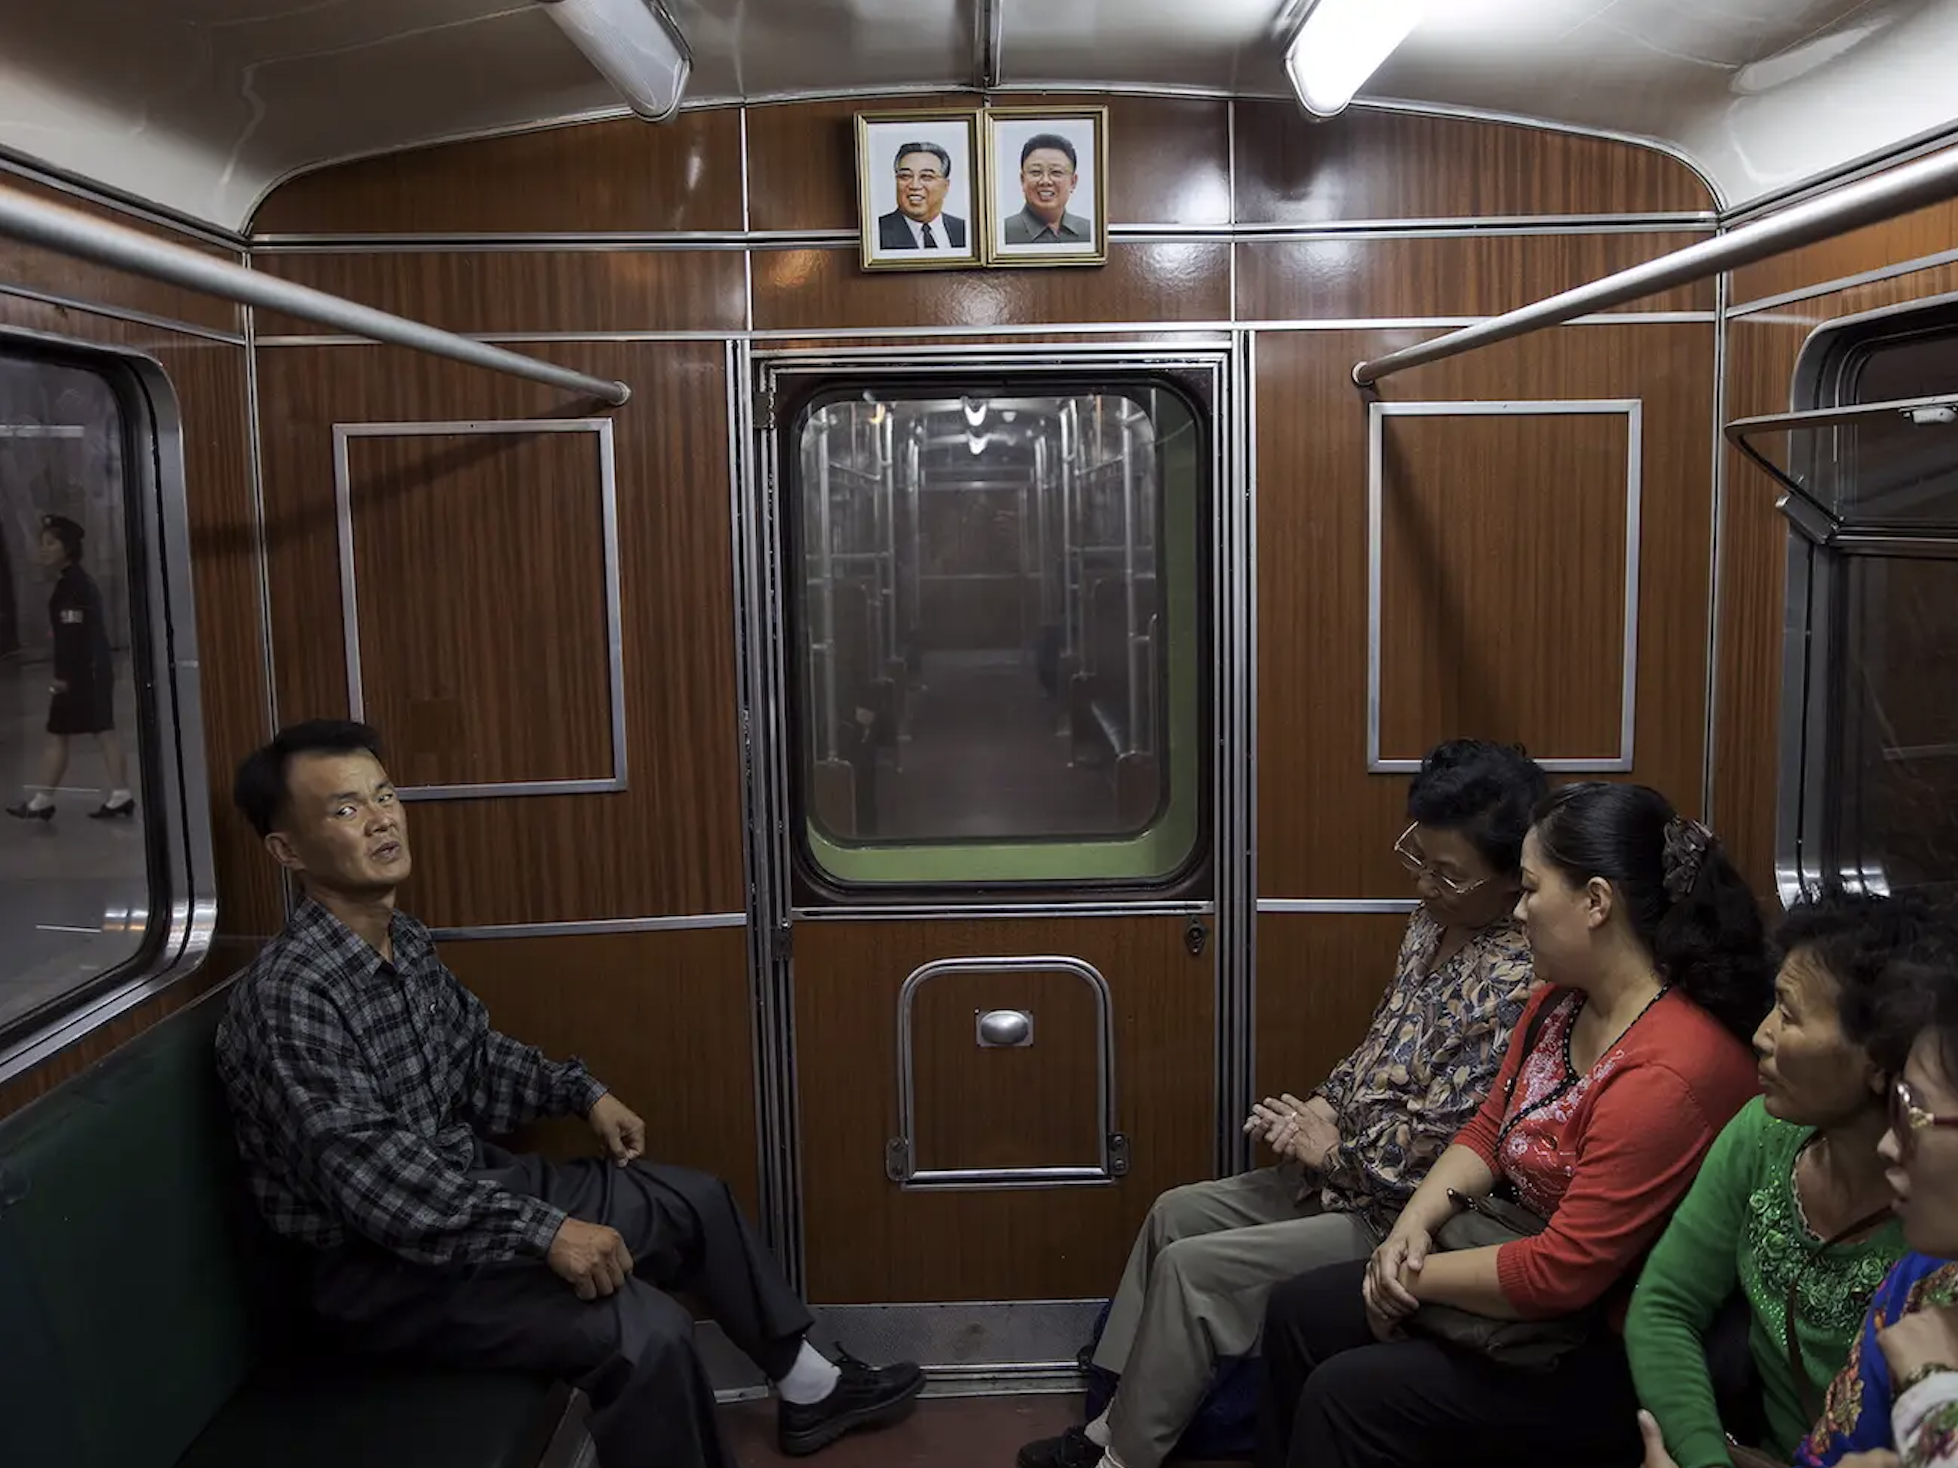  Each carriage contains portraits of Kim Il-Sung and Kim Jong-Il, framed thicker at the top to give the impression that the former leaders are looking over the commuters 